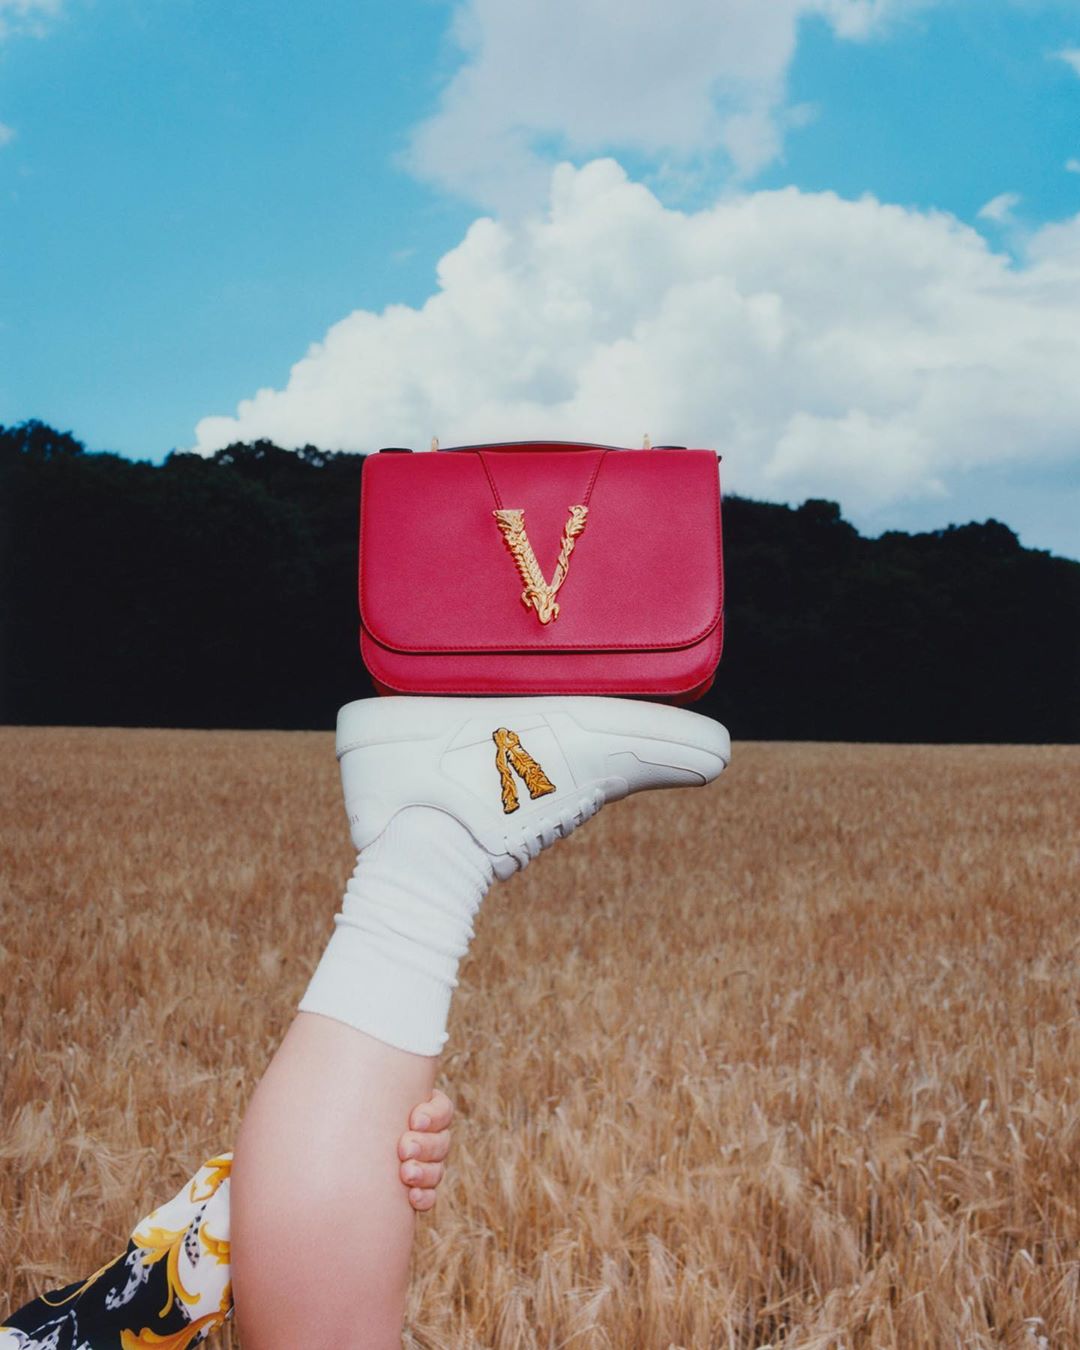 Versace - Feeling flexible - the #VersaceVirtus shoulder bag rests steadily on the sole of our Ilus sneaker in an act of perfect V symmetry. Shop the styles through the link in bio. #VeryVersace